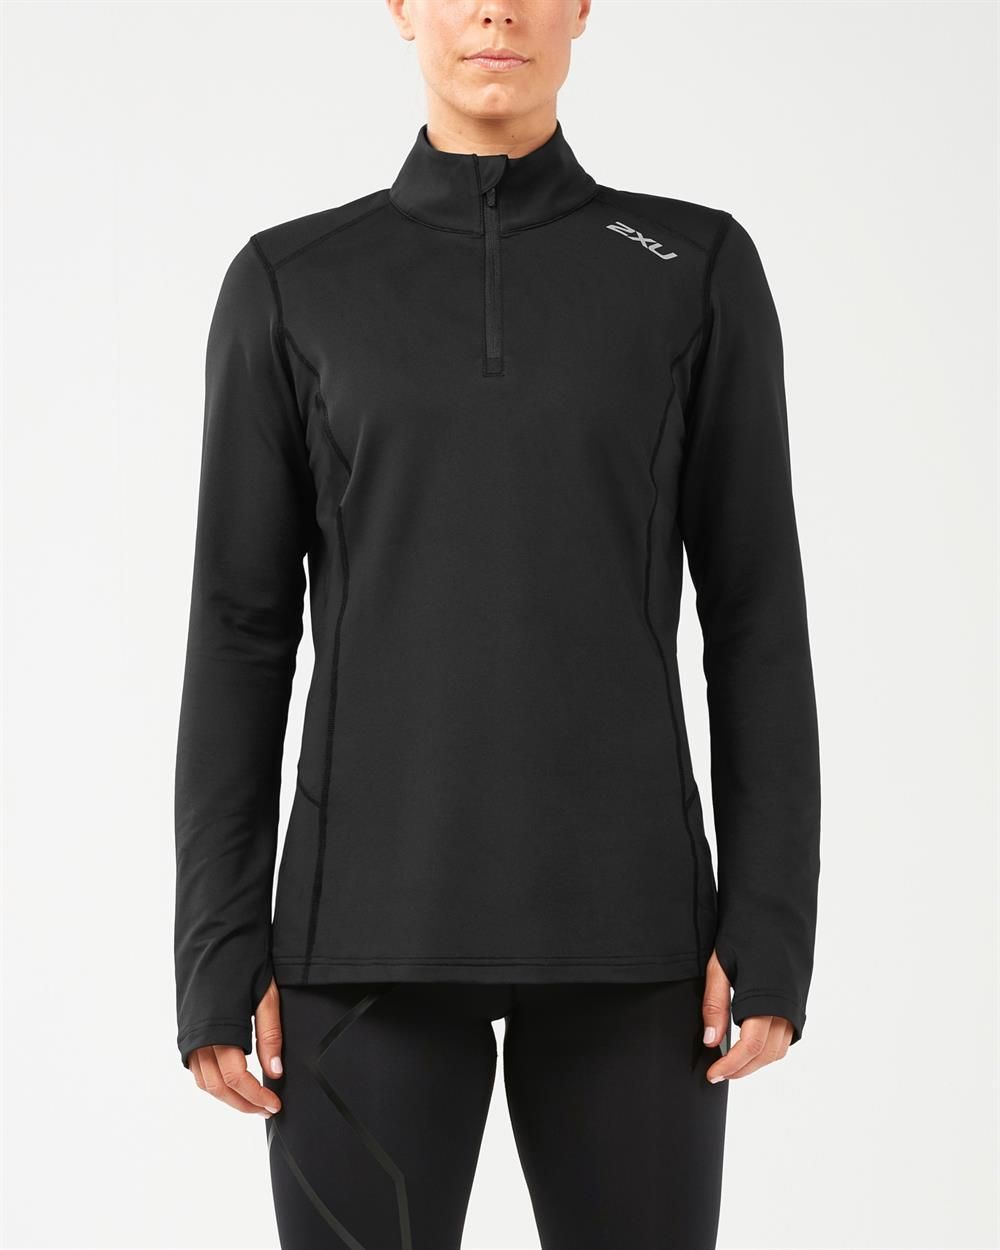 Xvent 1/4 Zip Long Sleeve Top Black, Jersey Shell, 100% Polyester, Mesh Vapor Stretch, 88% Polyester / 12% Spandex 120gsm, Designed For Our Core Run Consumer, The Xvent 1/4 Zip Top Offers, Excellent Breathability And Moisture Control, Perfect For Race Day, Or Training,